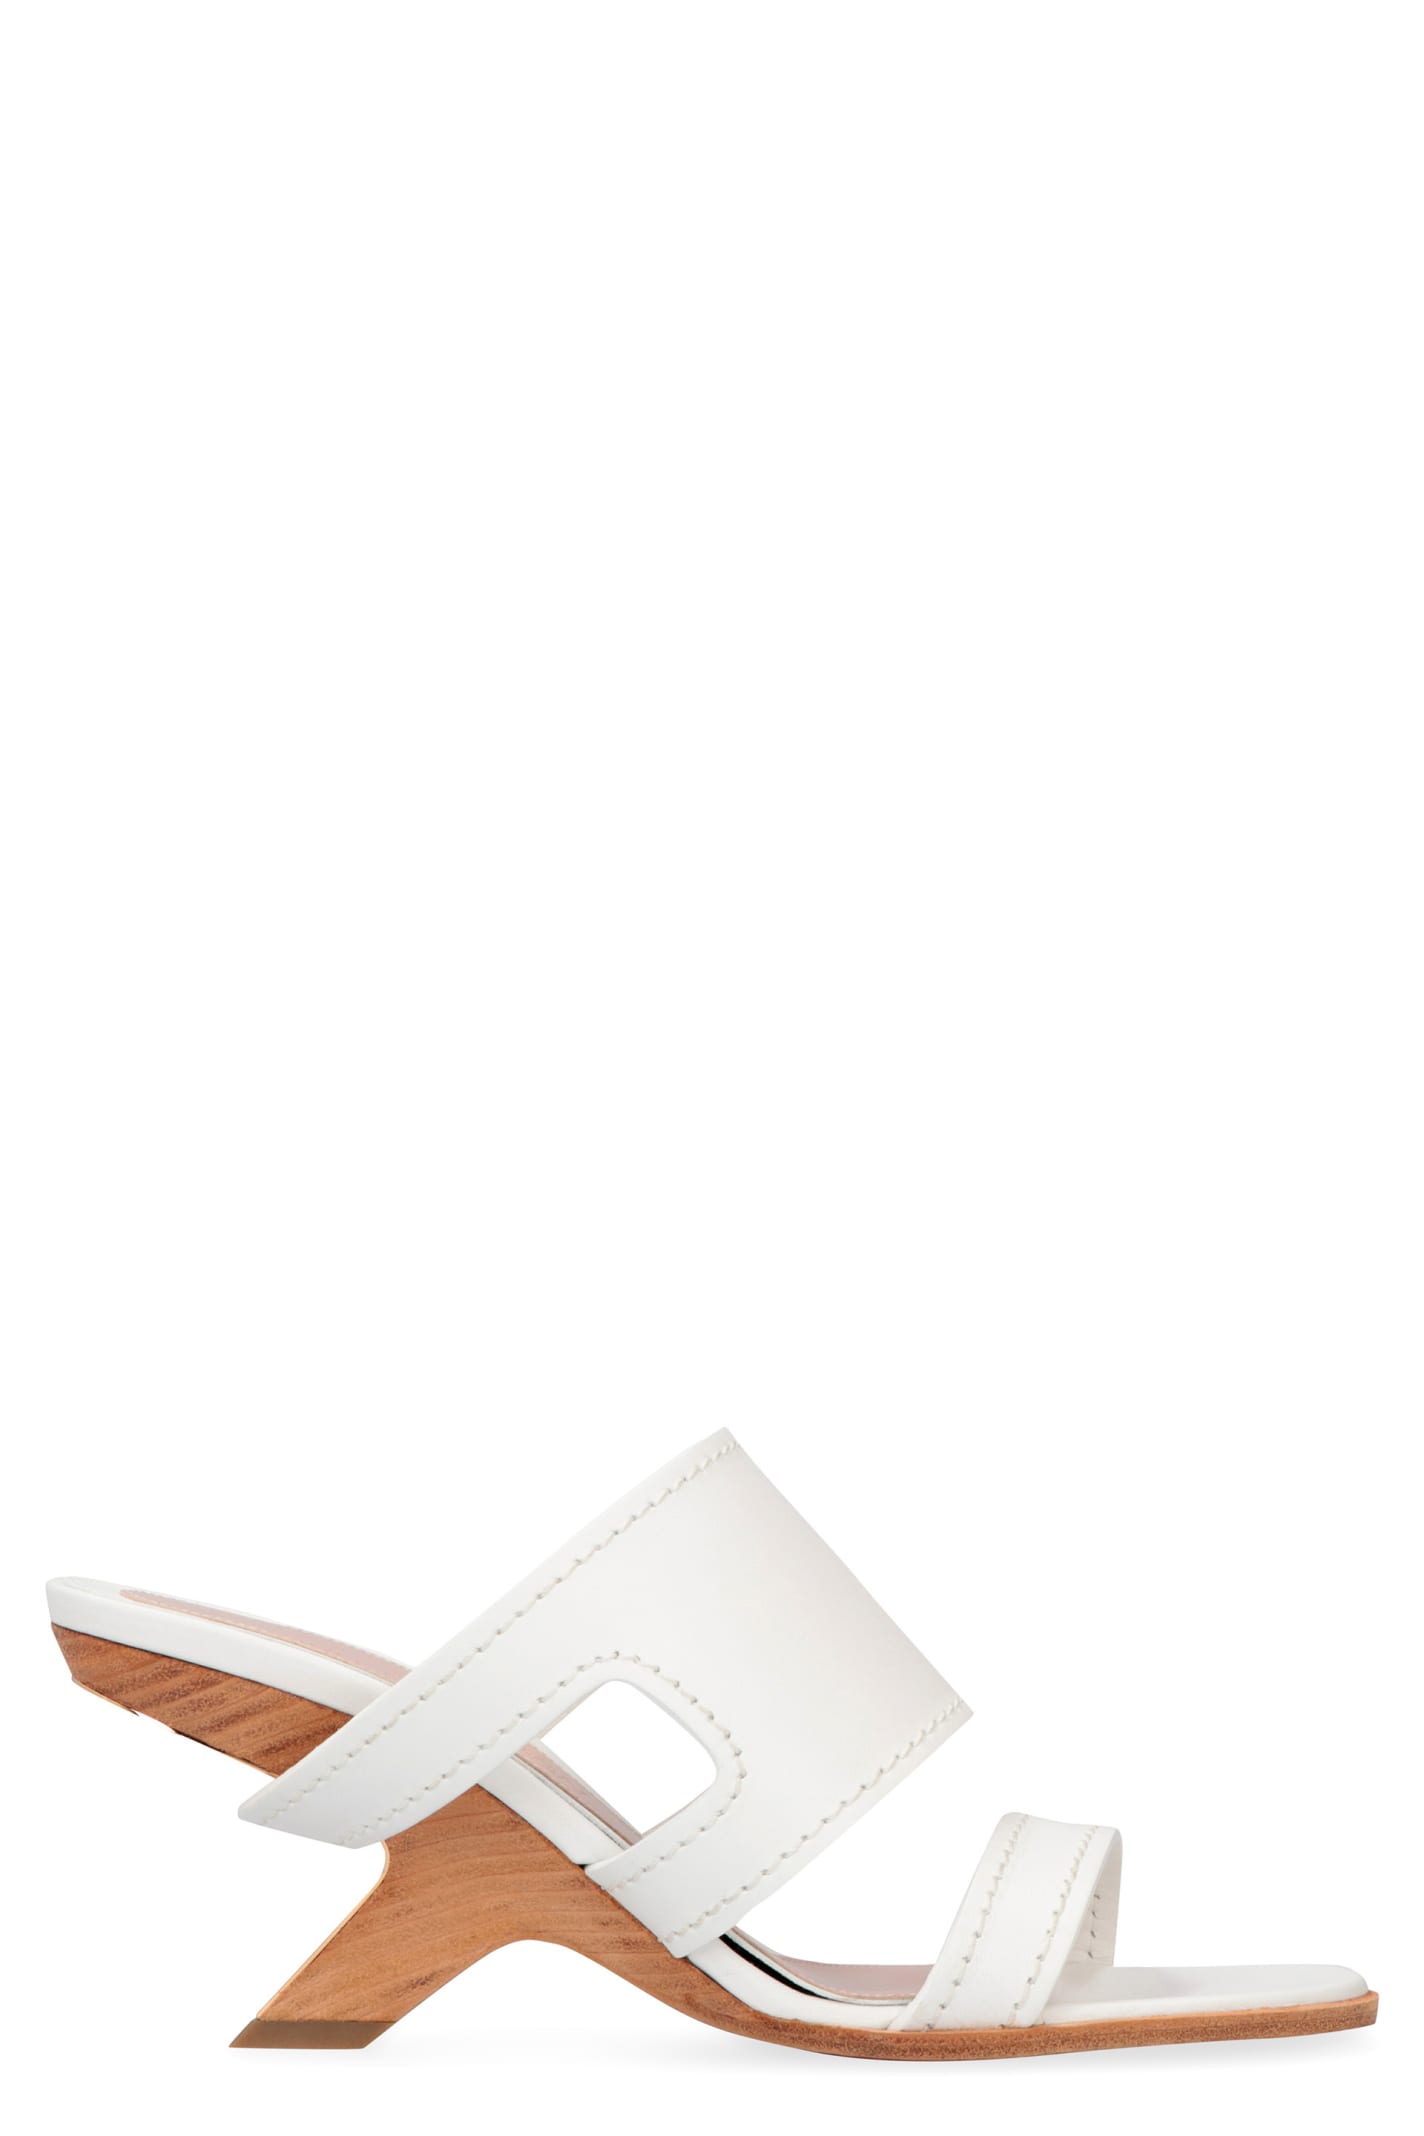 Buy Alexander McQueen Leather Mules online, shop Alexander McQueen shoes with free shipping